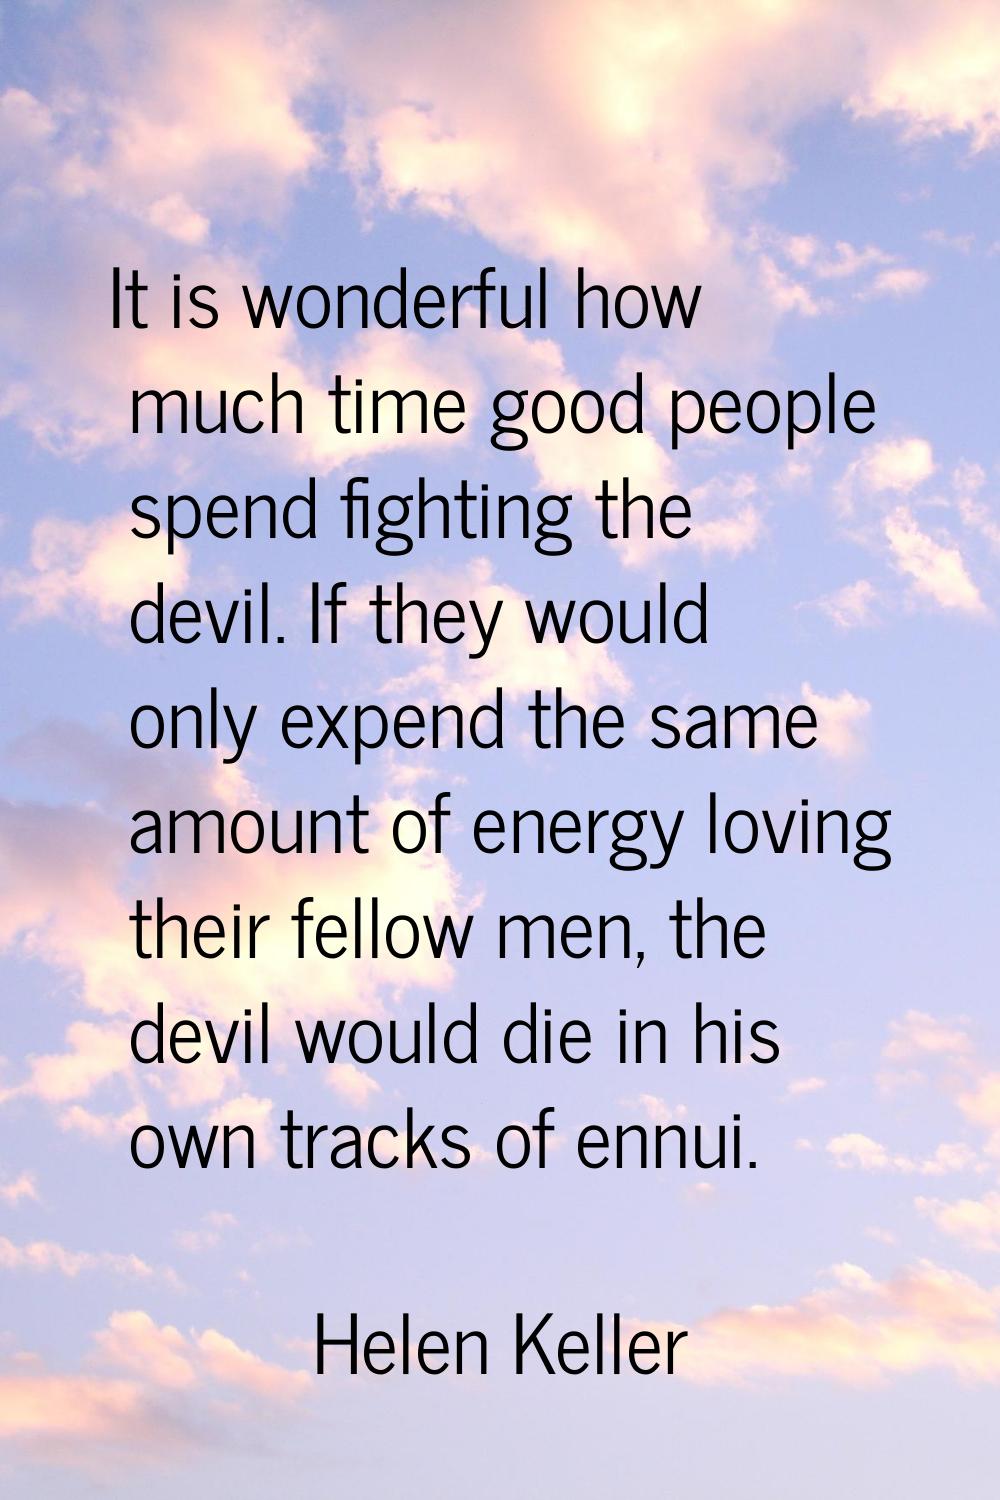 It is wonderful how much time good people spend fighting the devil. If they would only expend the s